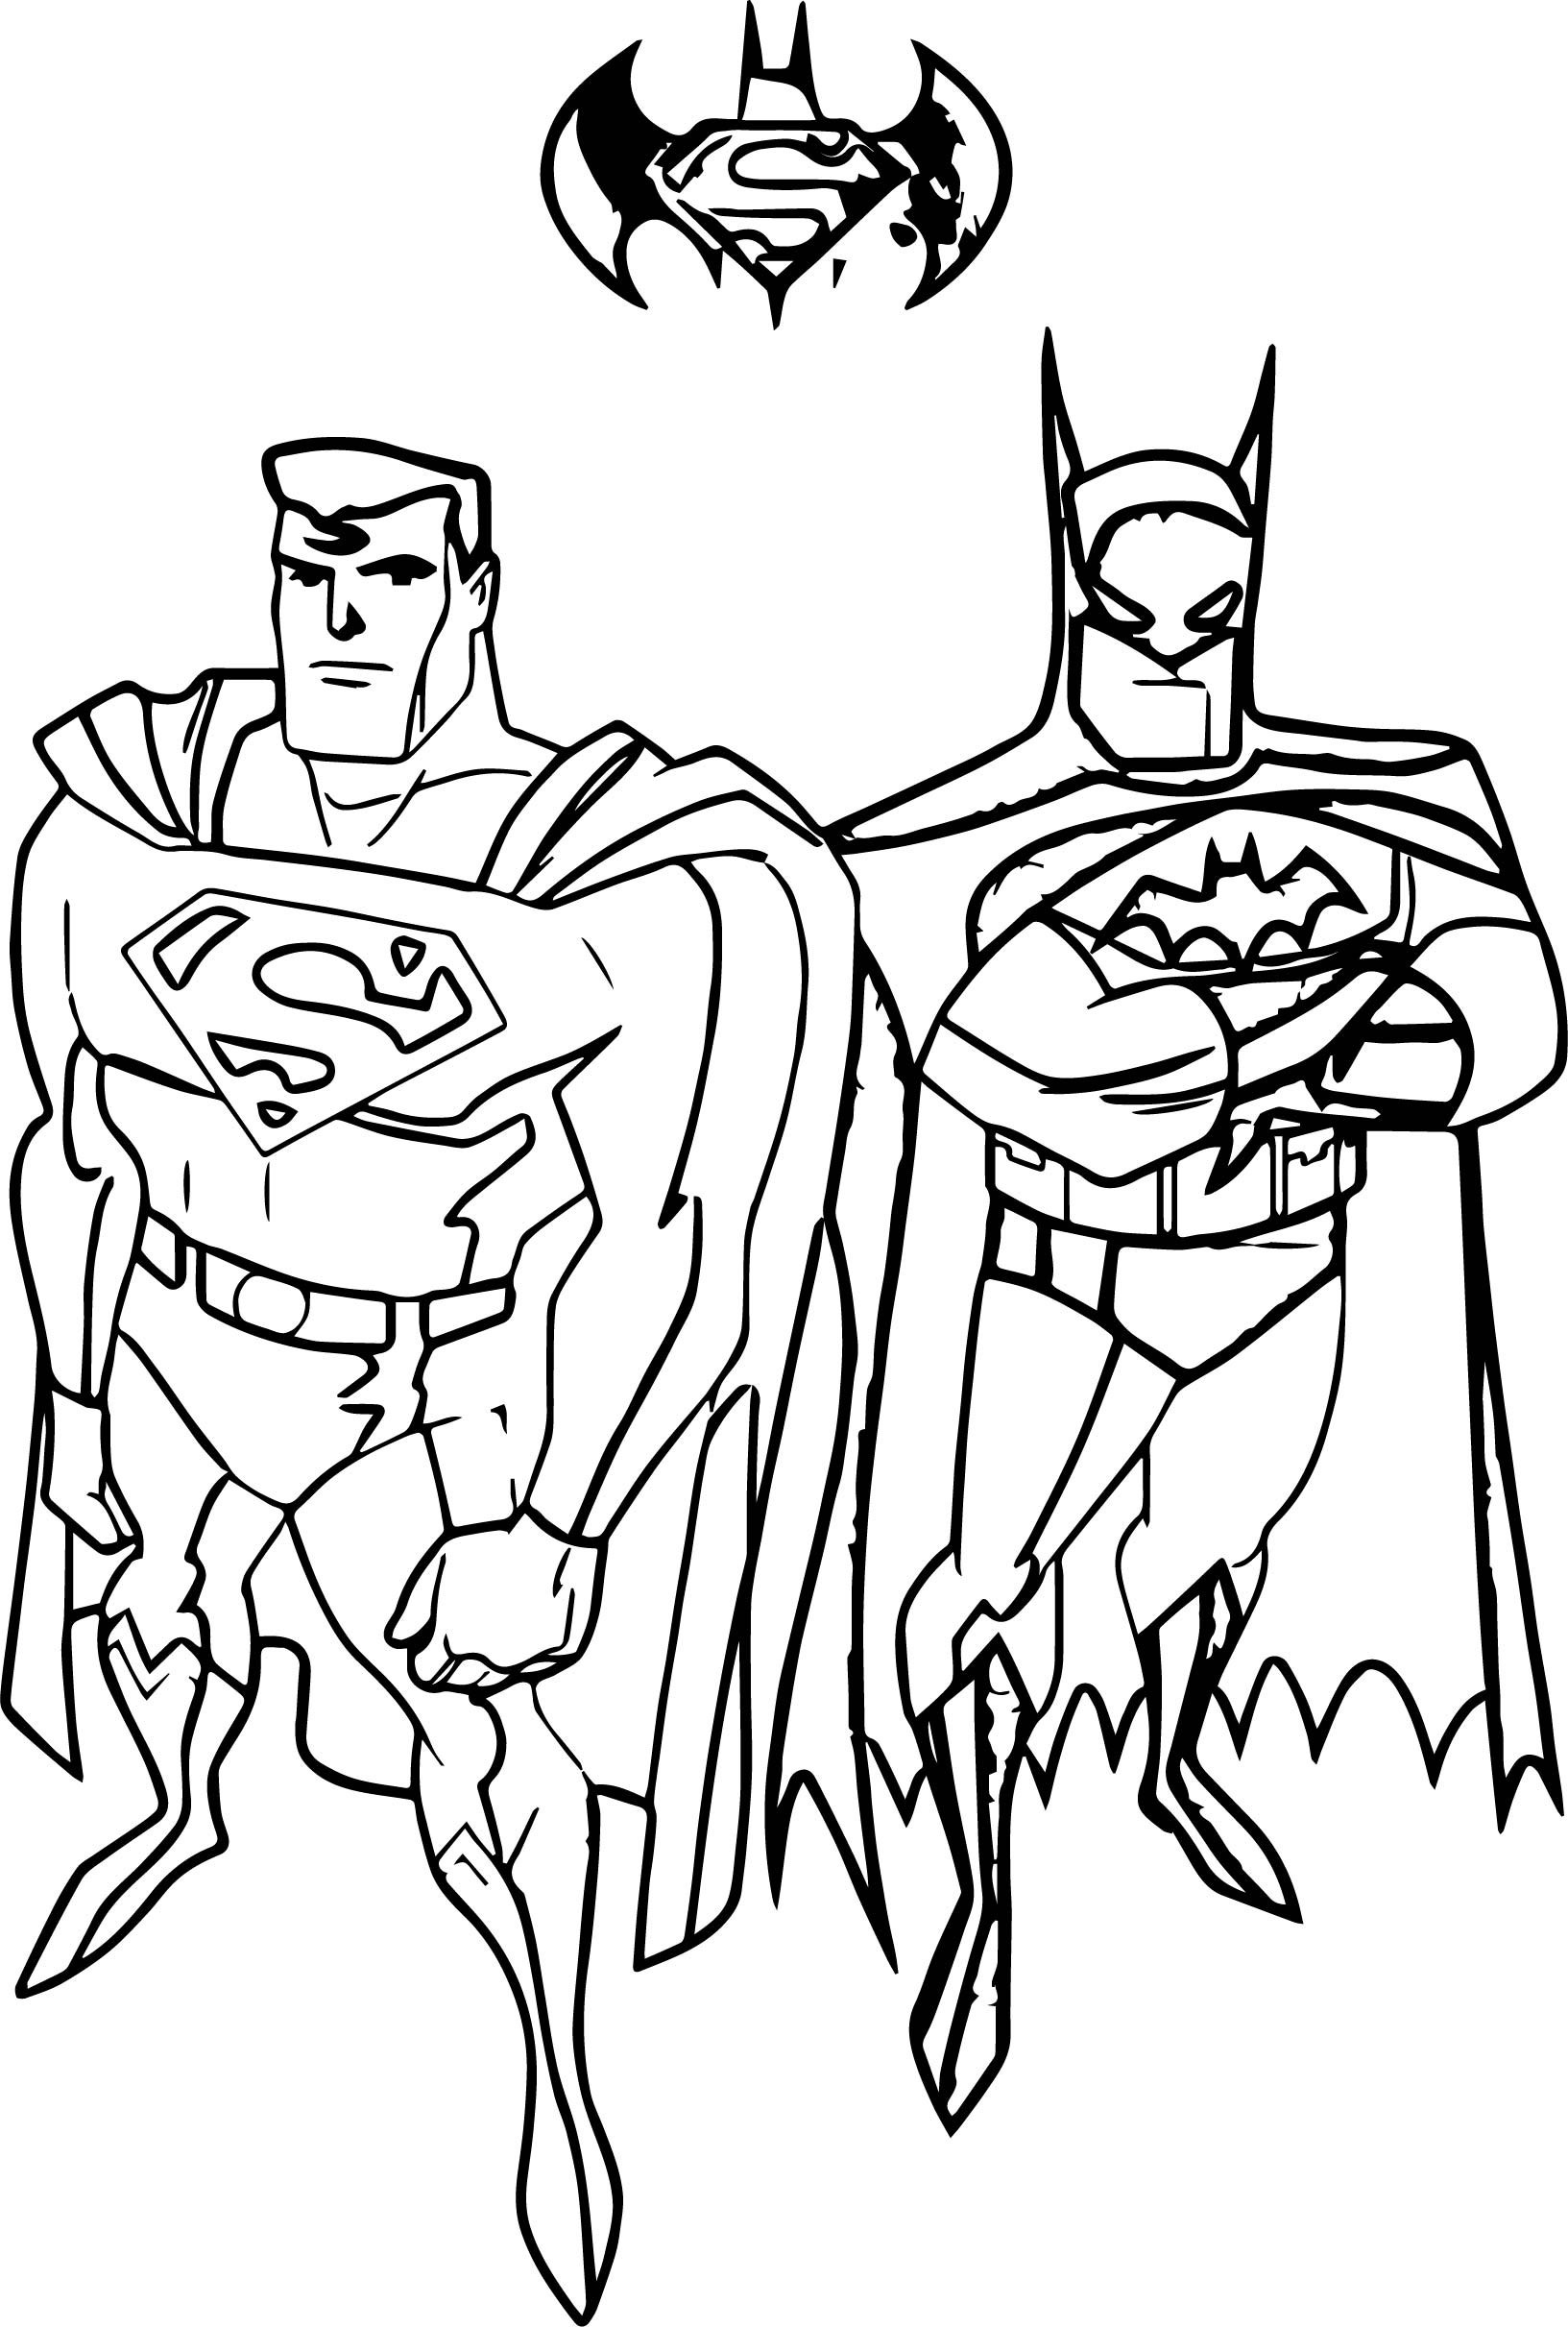 Lego Superman Coloring Pages at Free printable